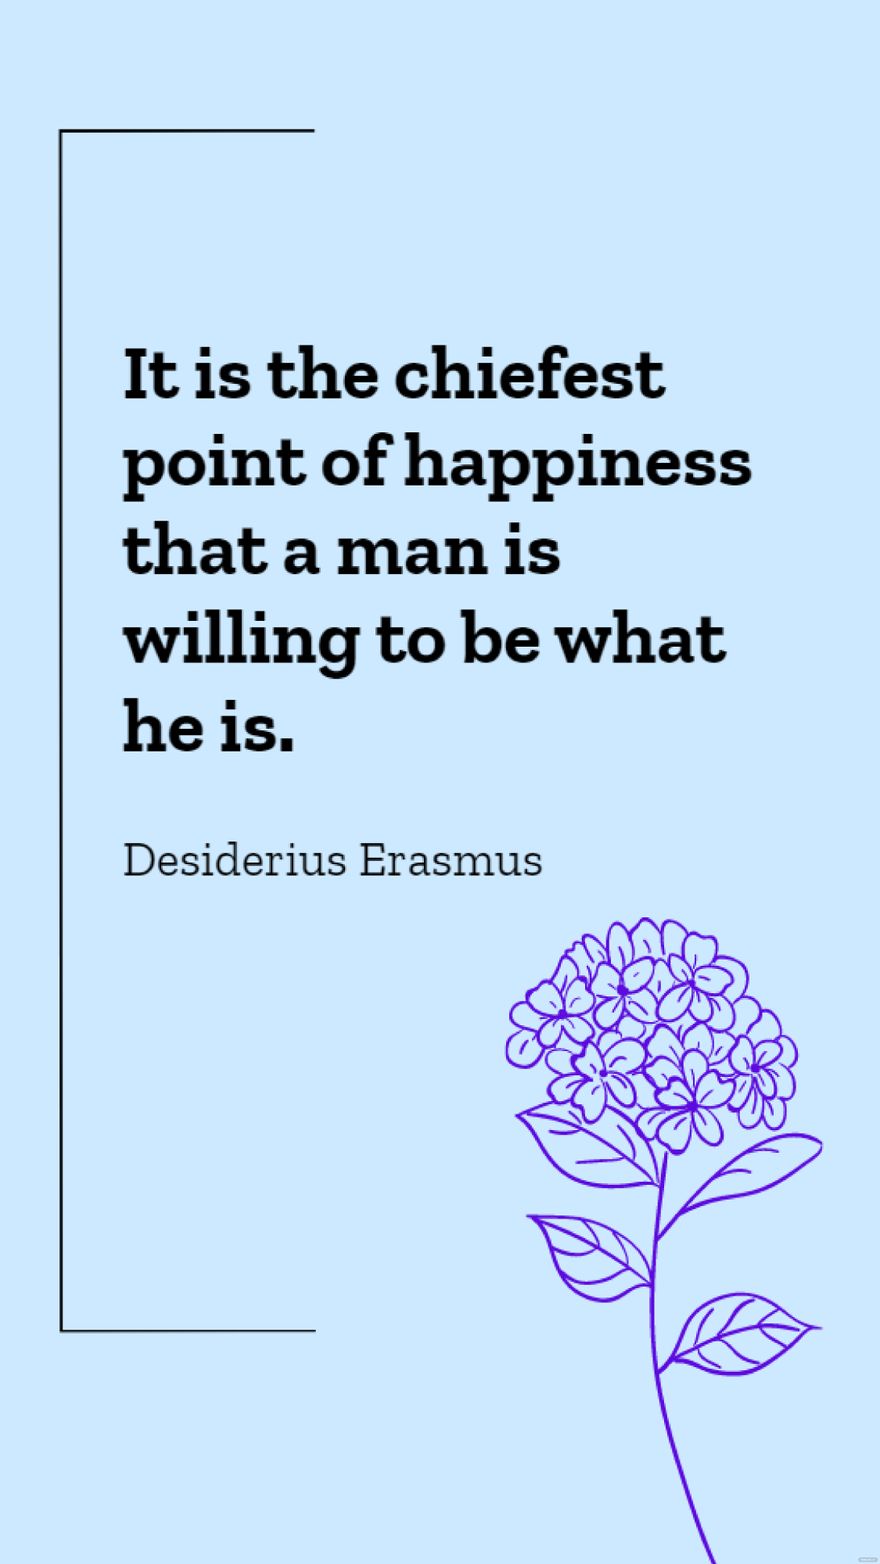 Free Desiderius Erasmus - It is the chiefest point of happiness that a man is willing to be what he is. in JPG